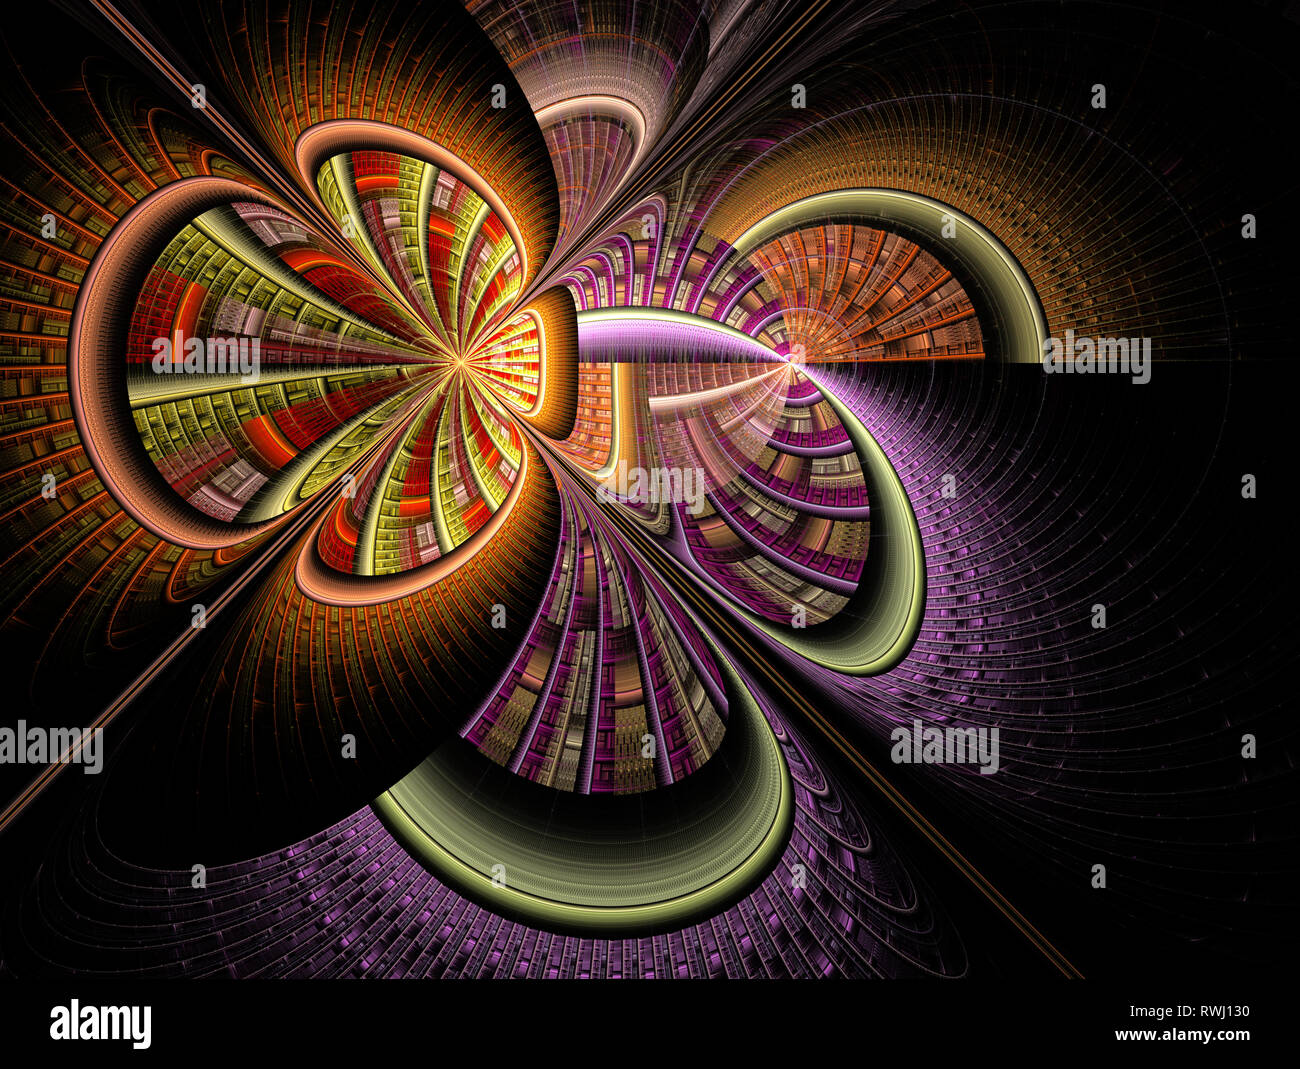 Stylized Images Of Flowers And Intersecting Spiral Lines The Infinity Of Space And Time Chaotic Movement In Space Collision Of Stars Interaction O Stock Photo Alamy